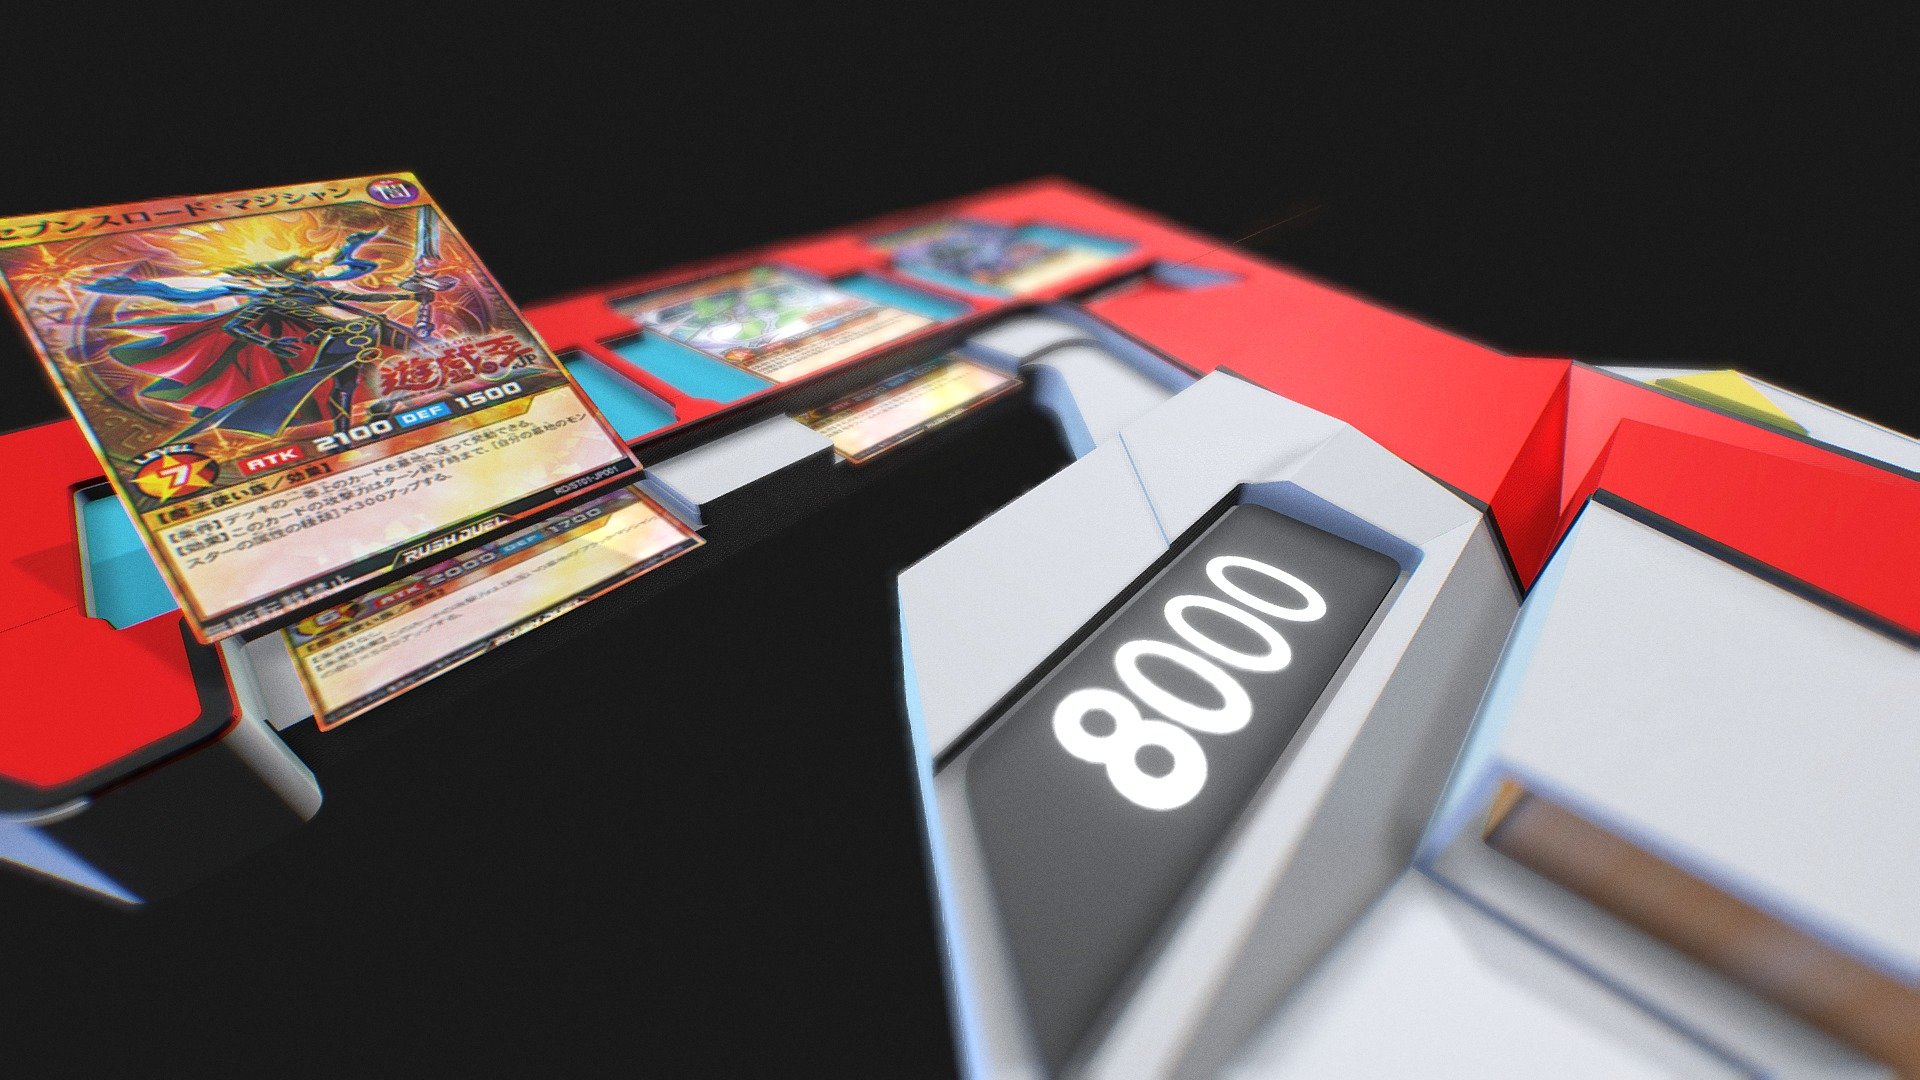 Yu Gi Oh Rush Duel Duel Disk Download Free 3d Model By Ahbangkun 381a827 Sketchfab 